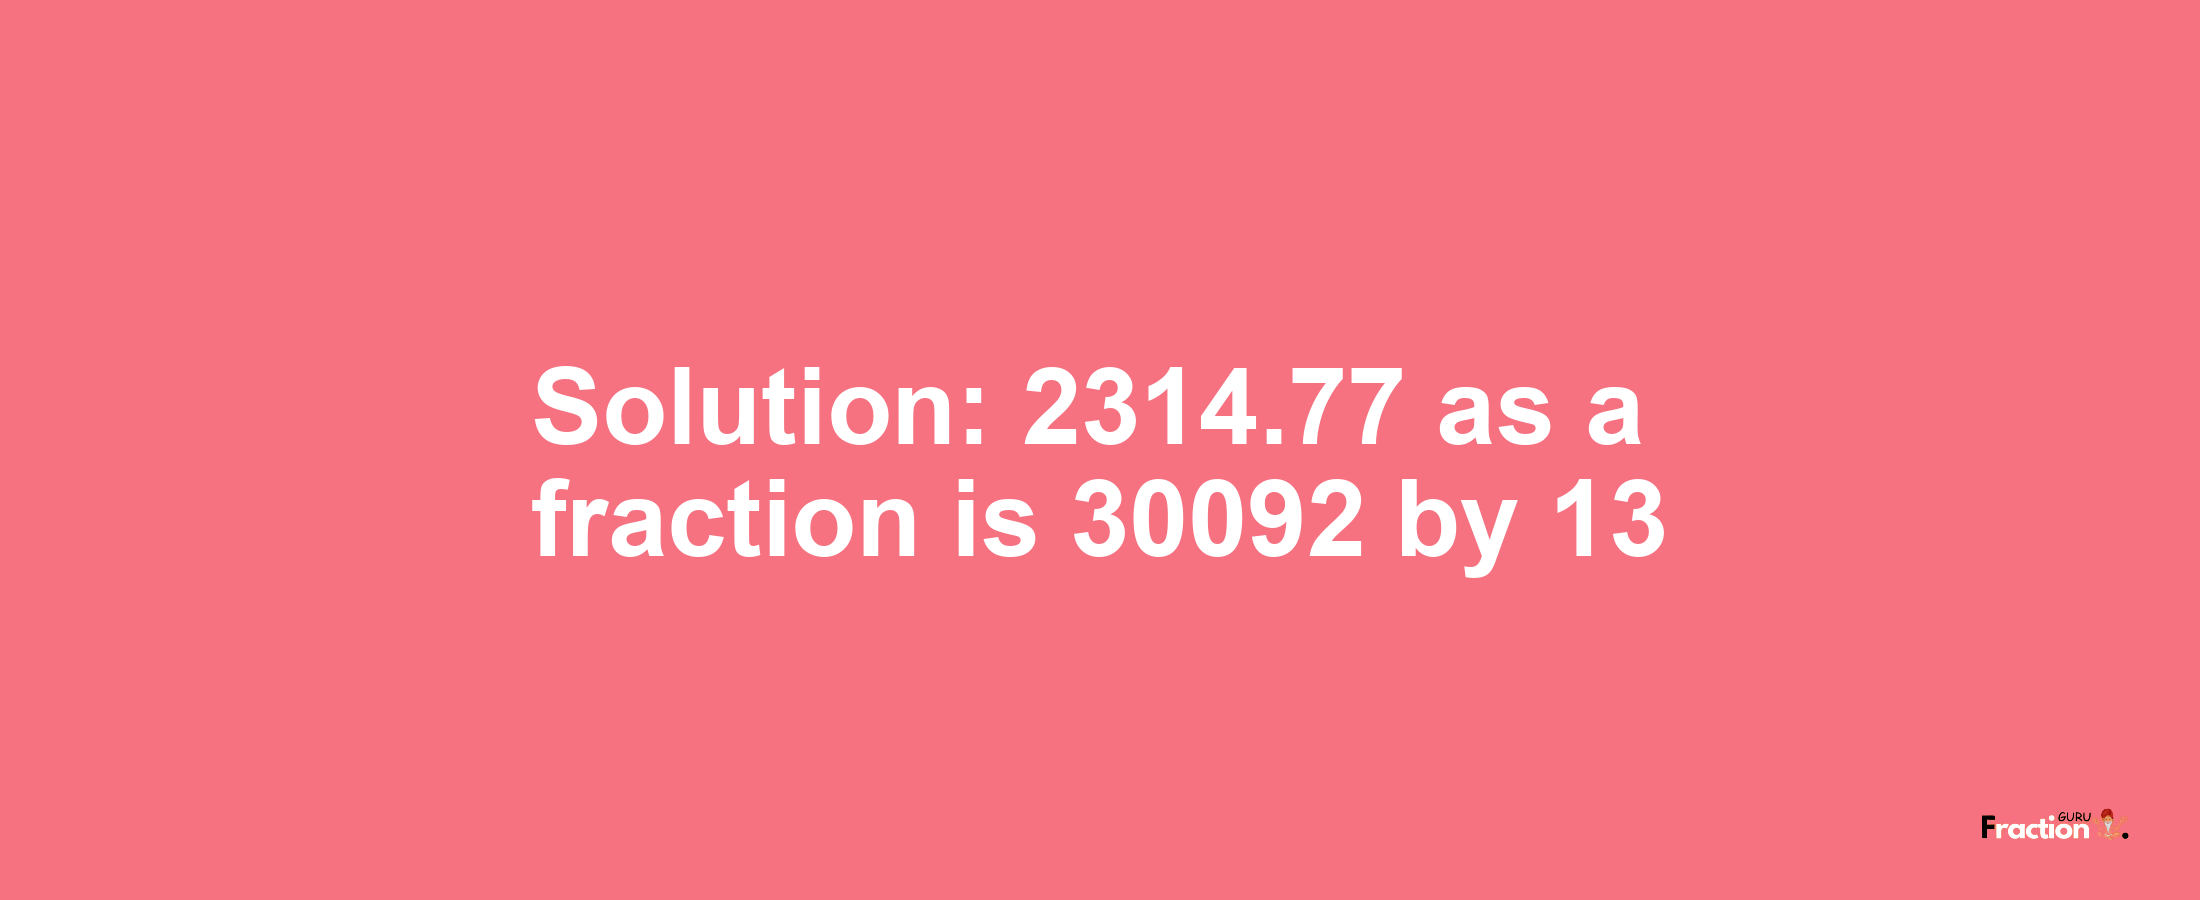 Solution:2314.77 as a fraction is 30092/13